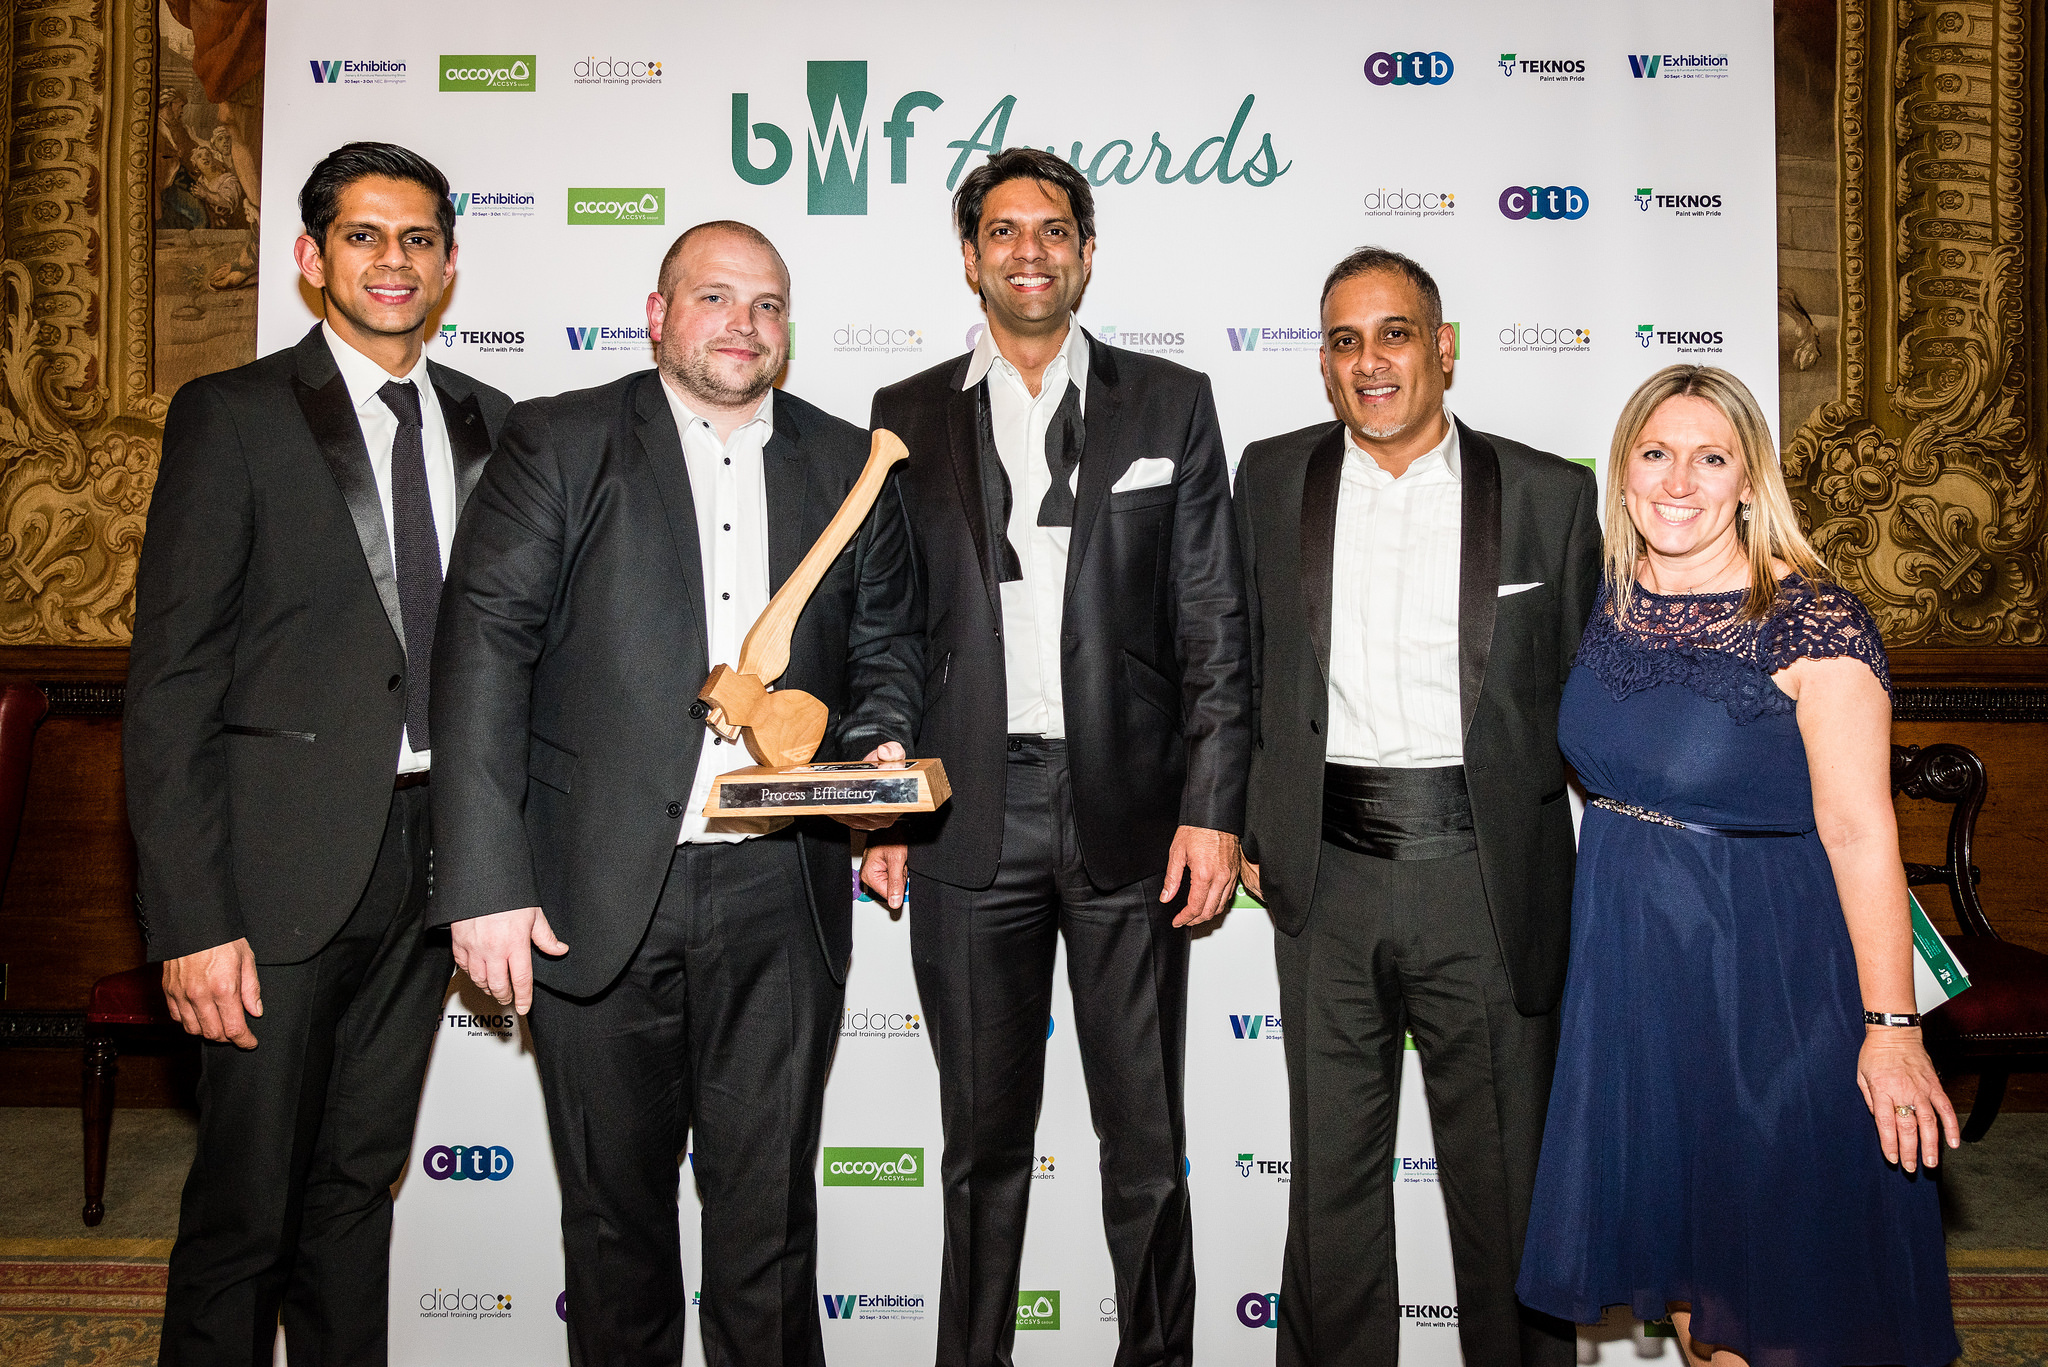 Rising stars and woodworking success stories celebrated at industry awards